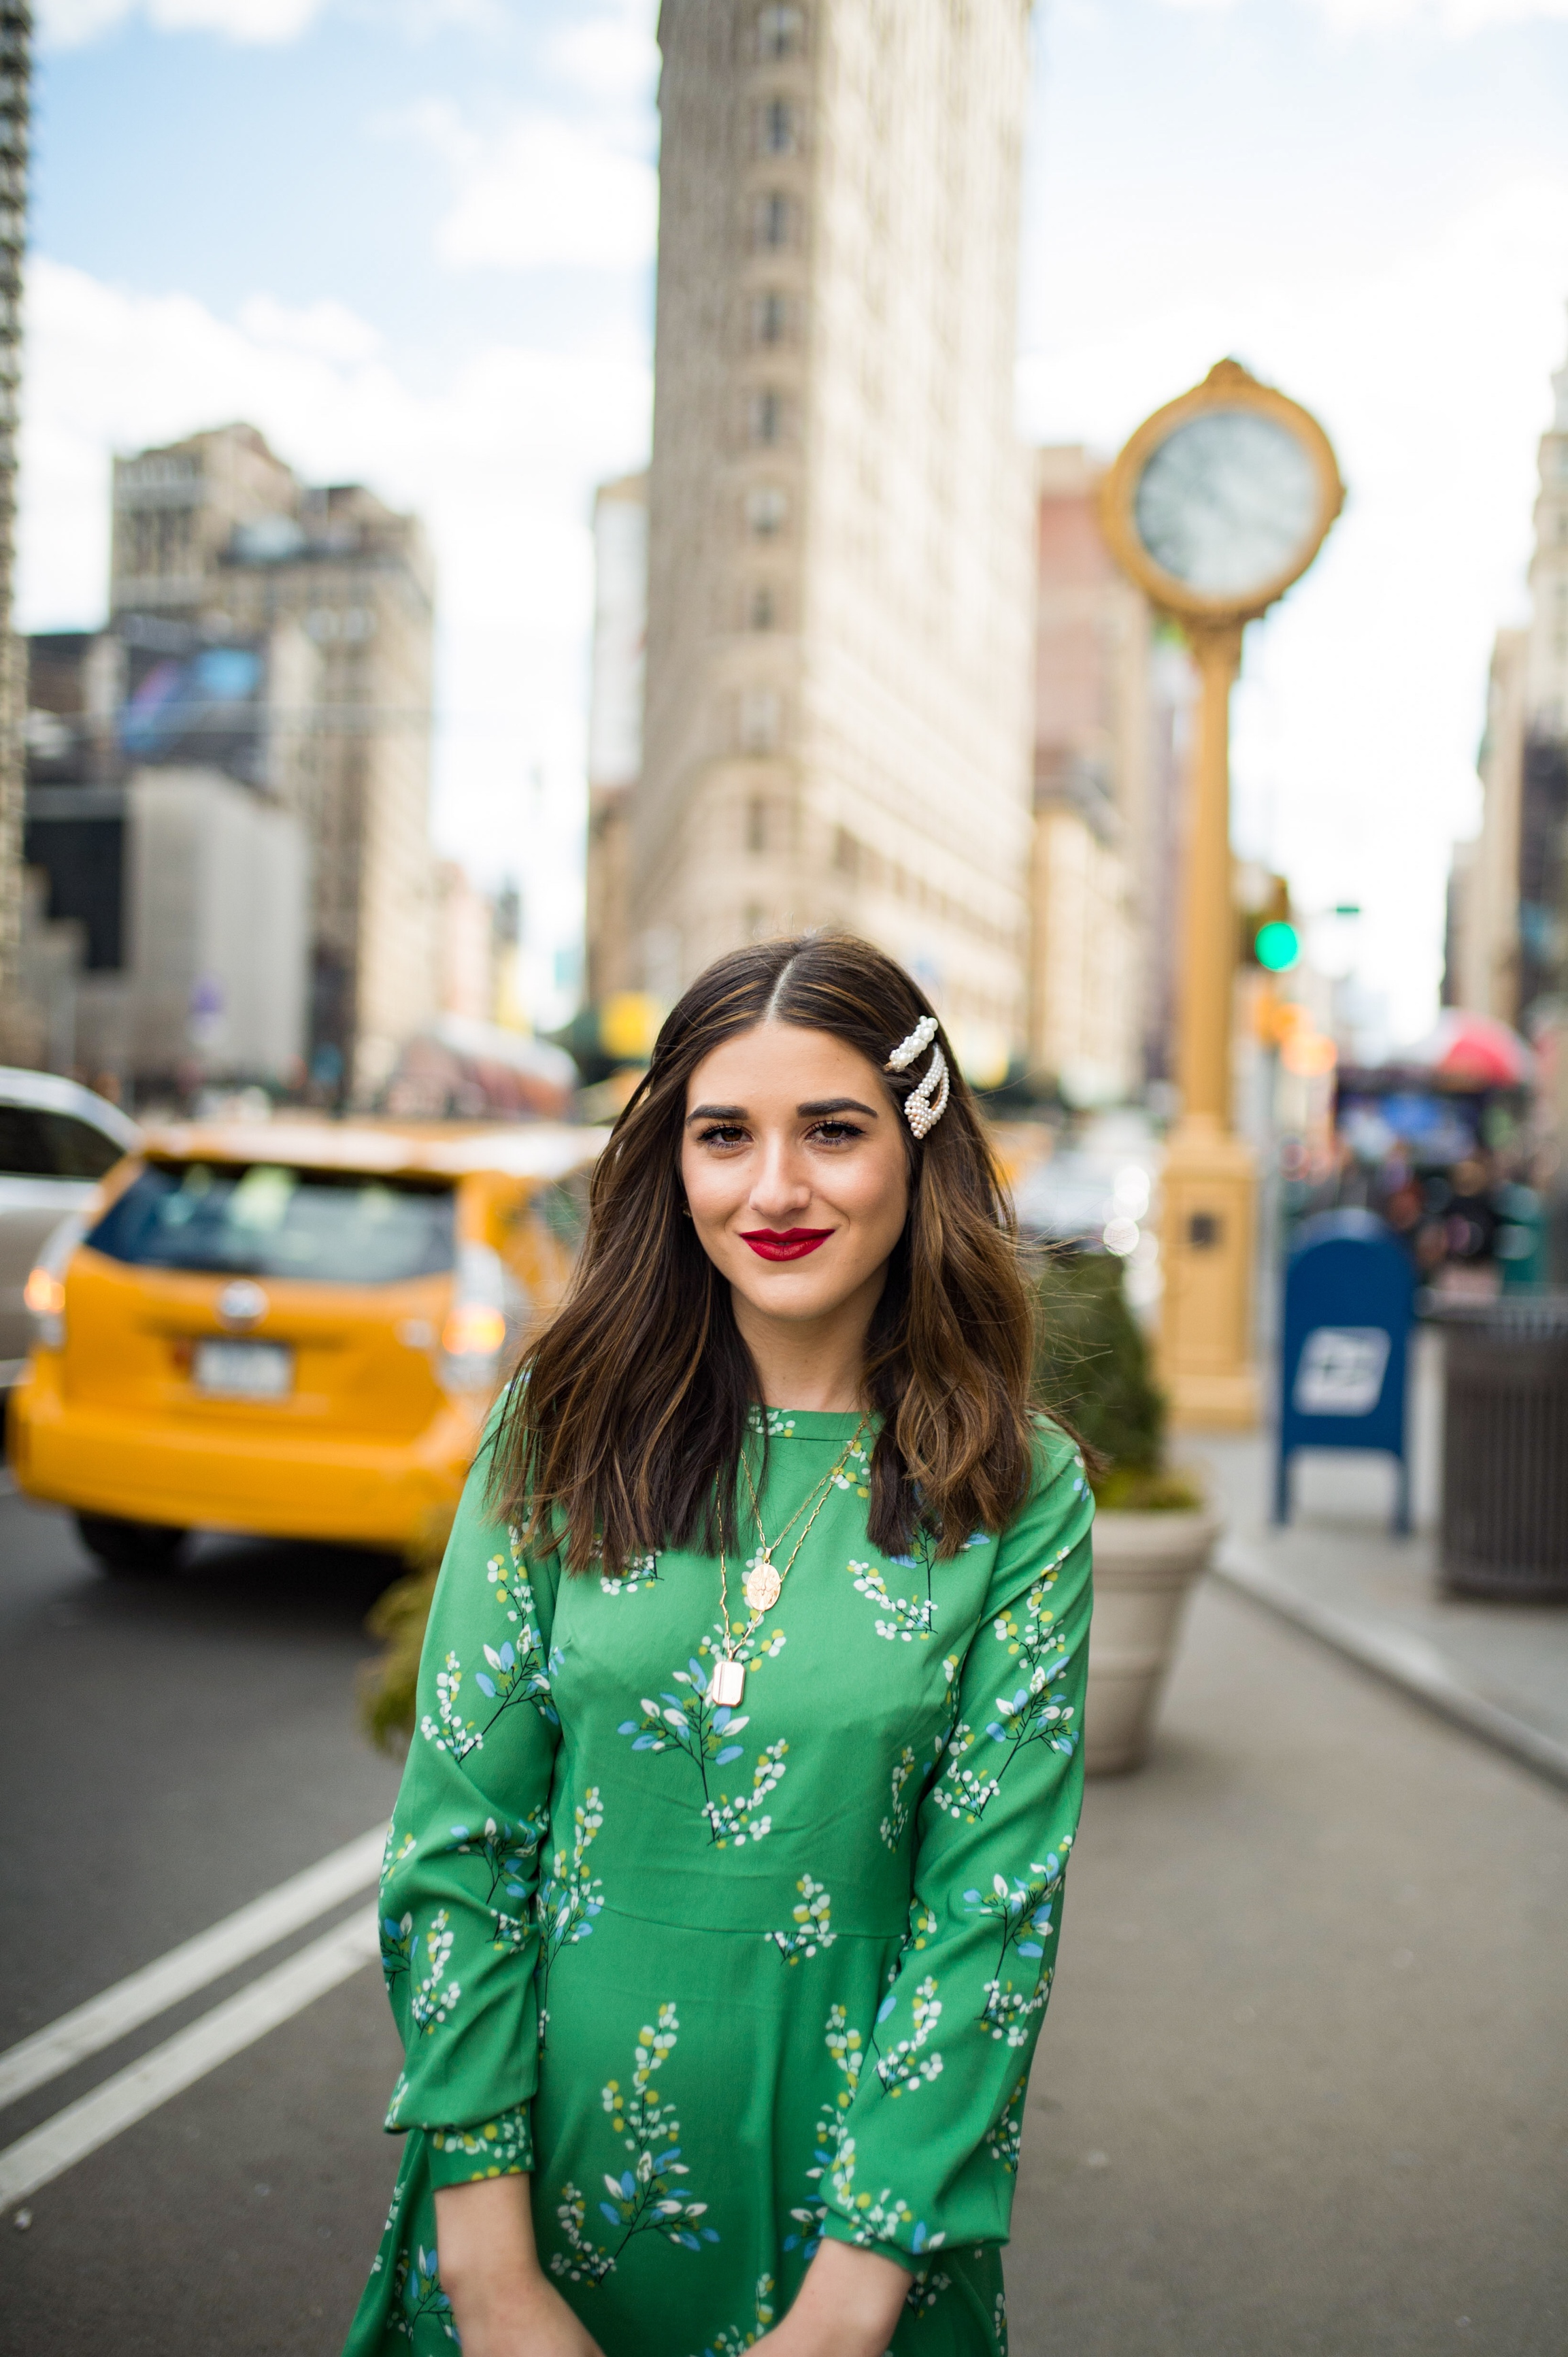 Styling Green For Spring LOFT Esther Santer Fashion Blog NYC Street Style Blogger Outfit OOTD Trendy Shopping White Heels Basket Circle Bag Florals Hair Accessories Pearl Clips Flatiron Photoshoot Inspo Inspiration  Petite Dress Inclusive Sizing Bag.jpg